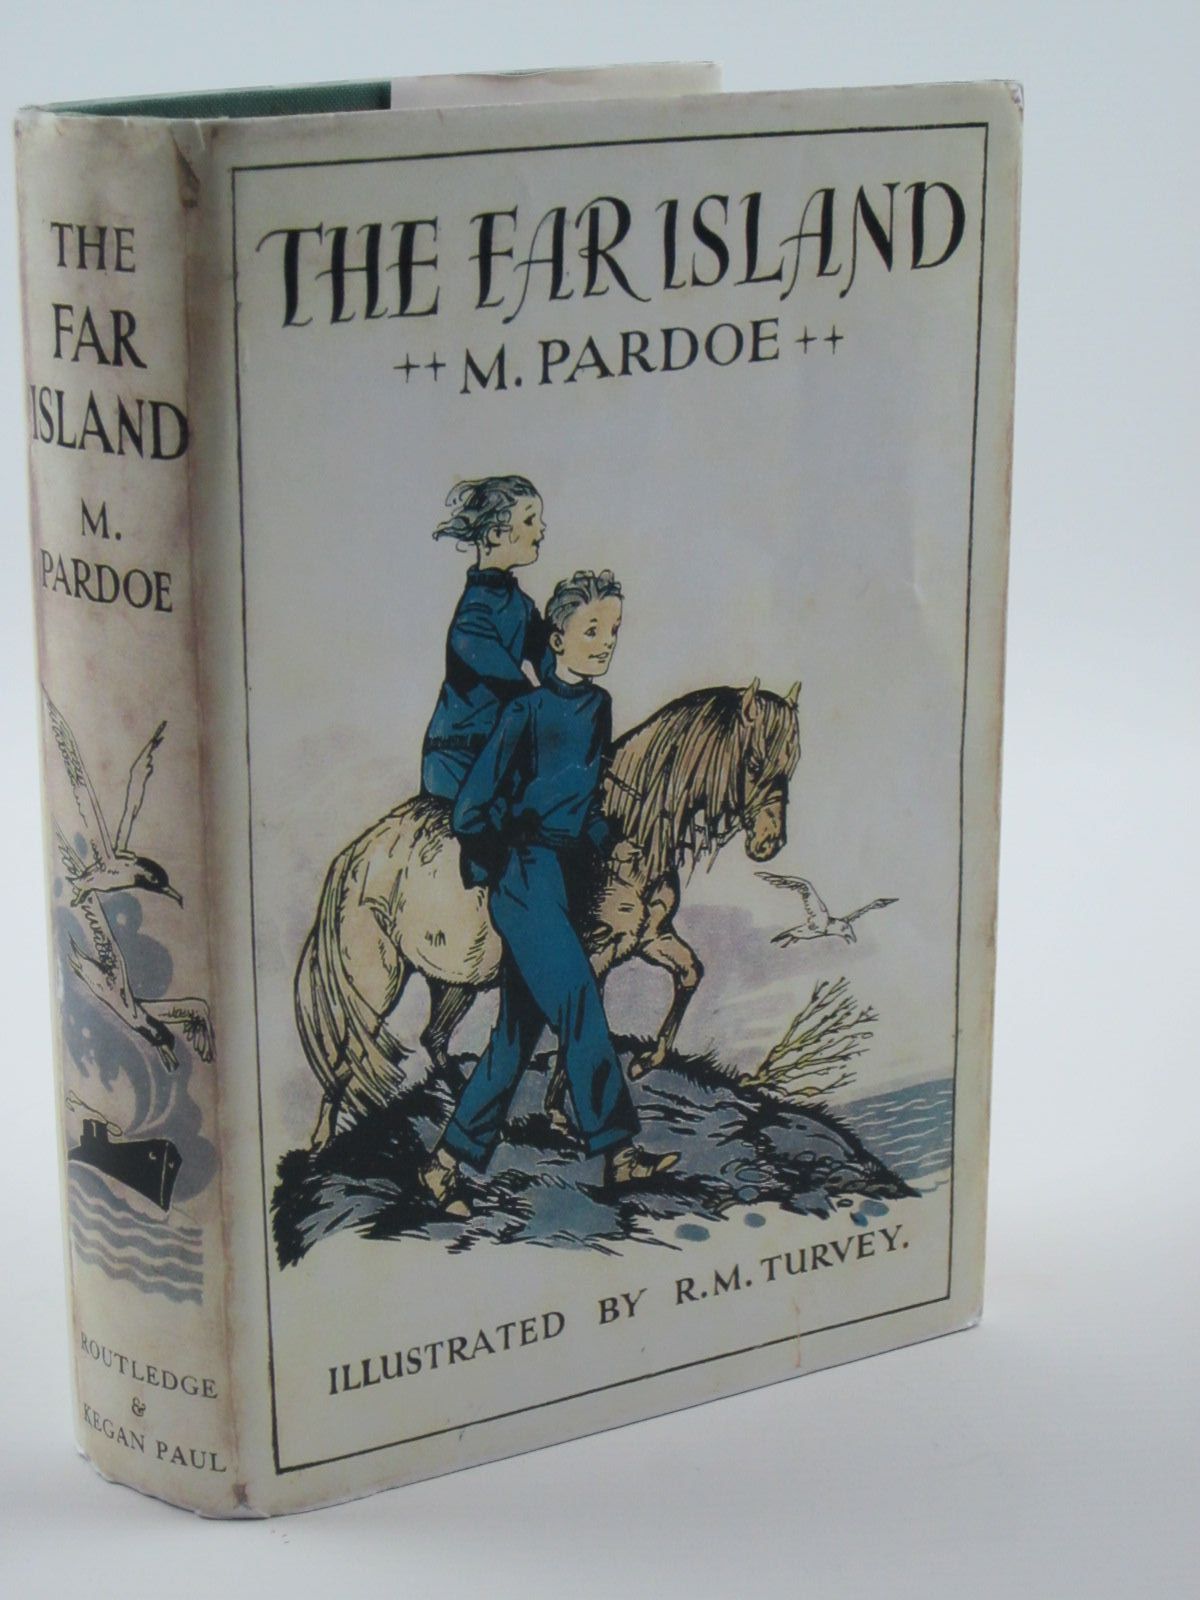 Cover of THE FAR ISLAND by M. Pardoe